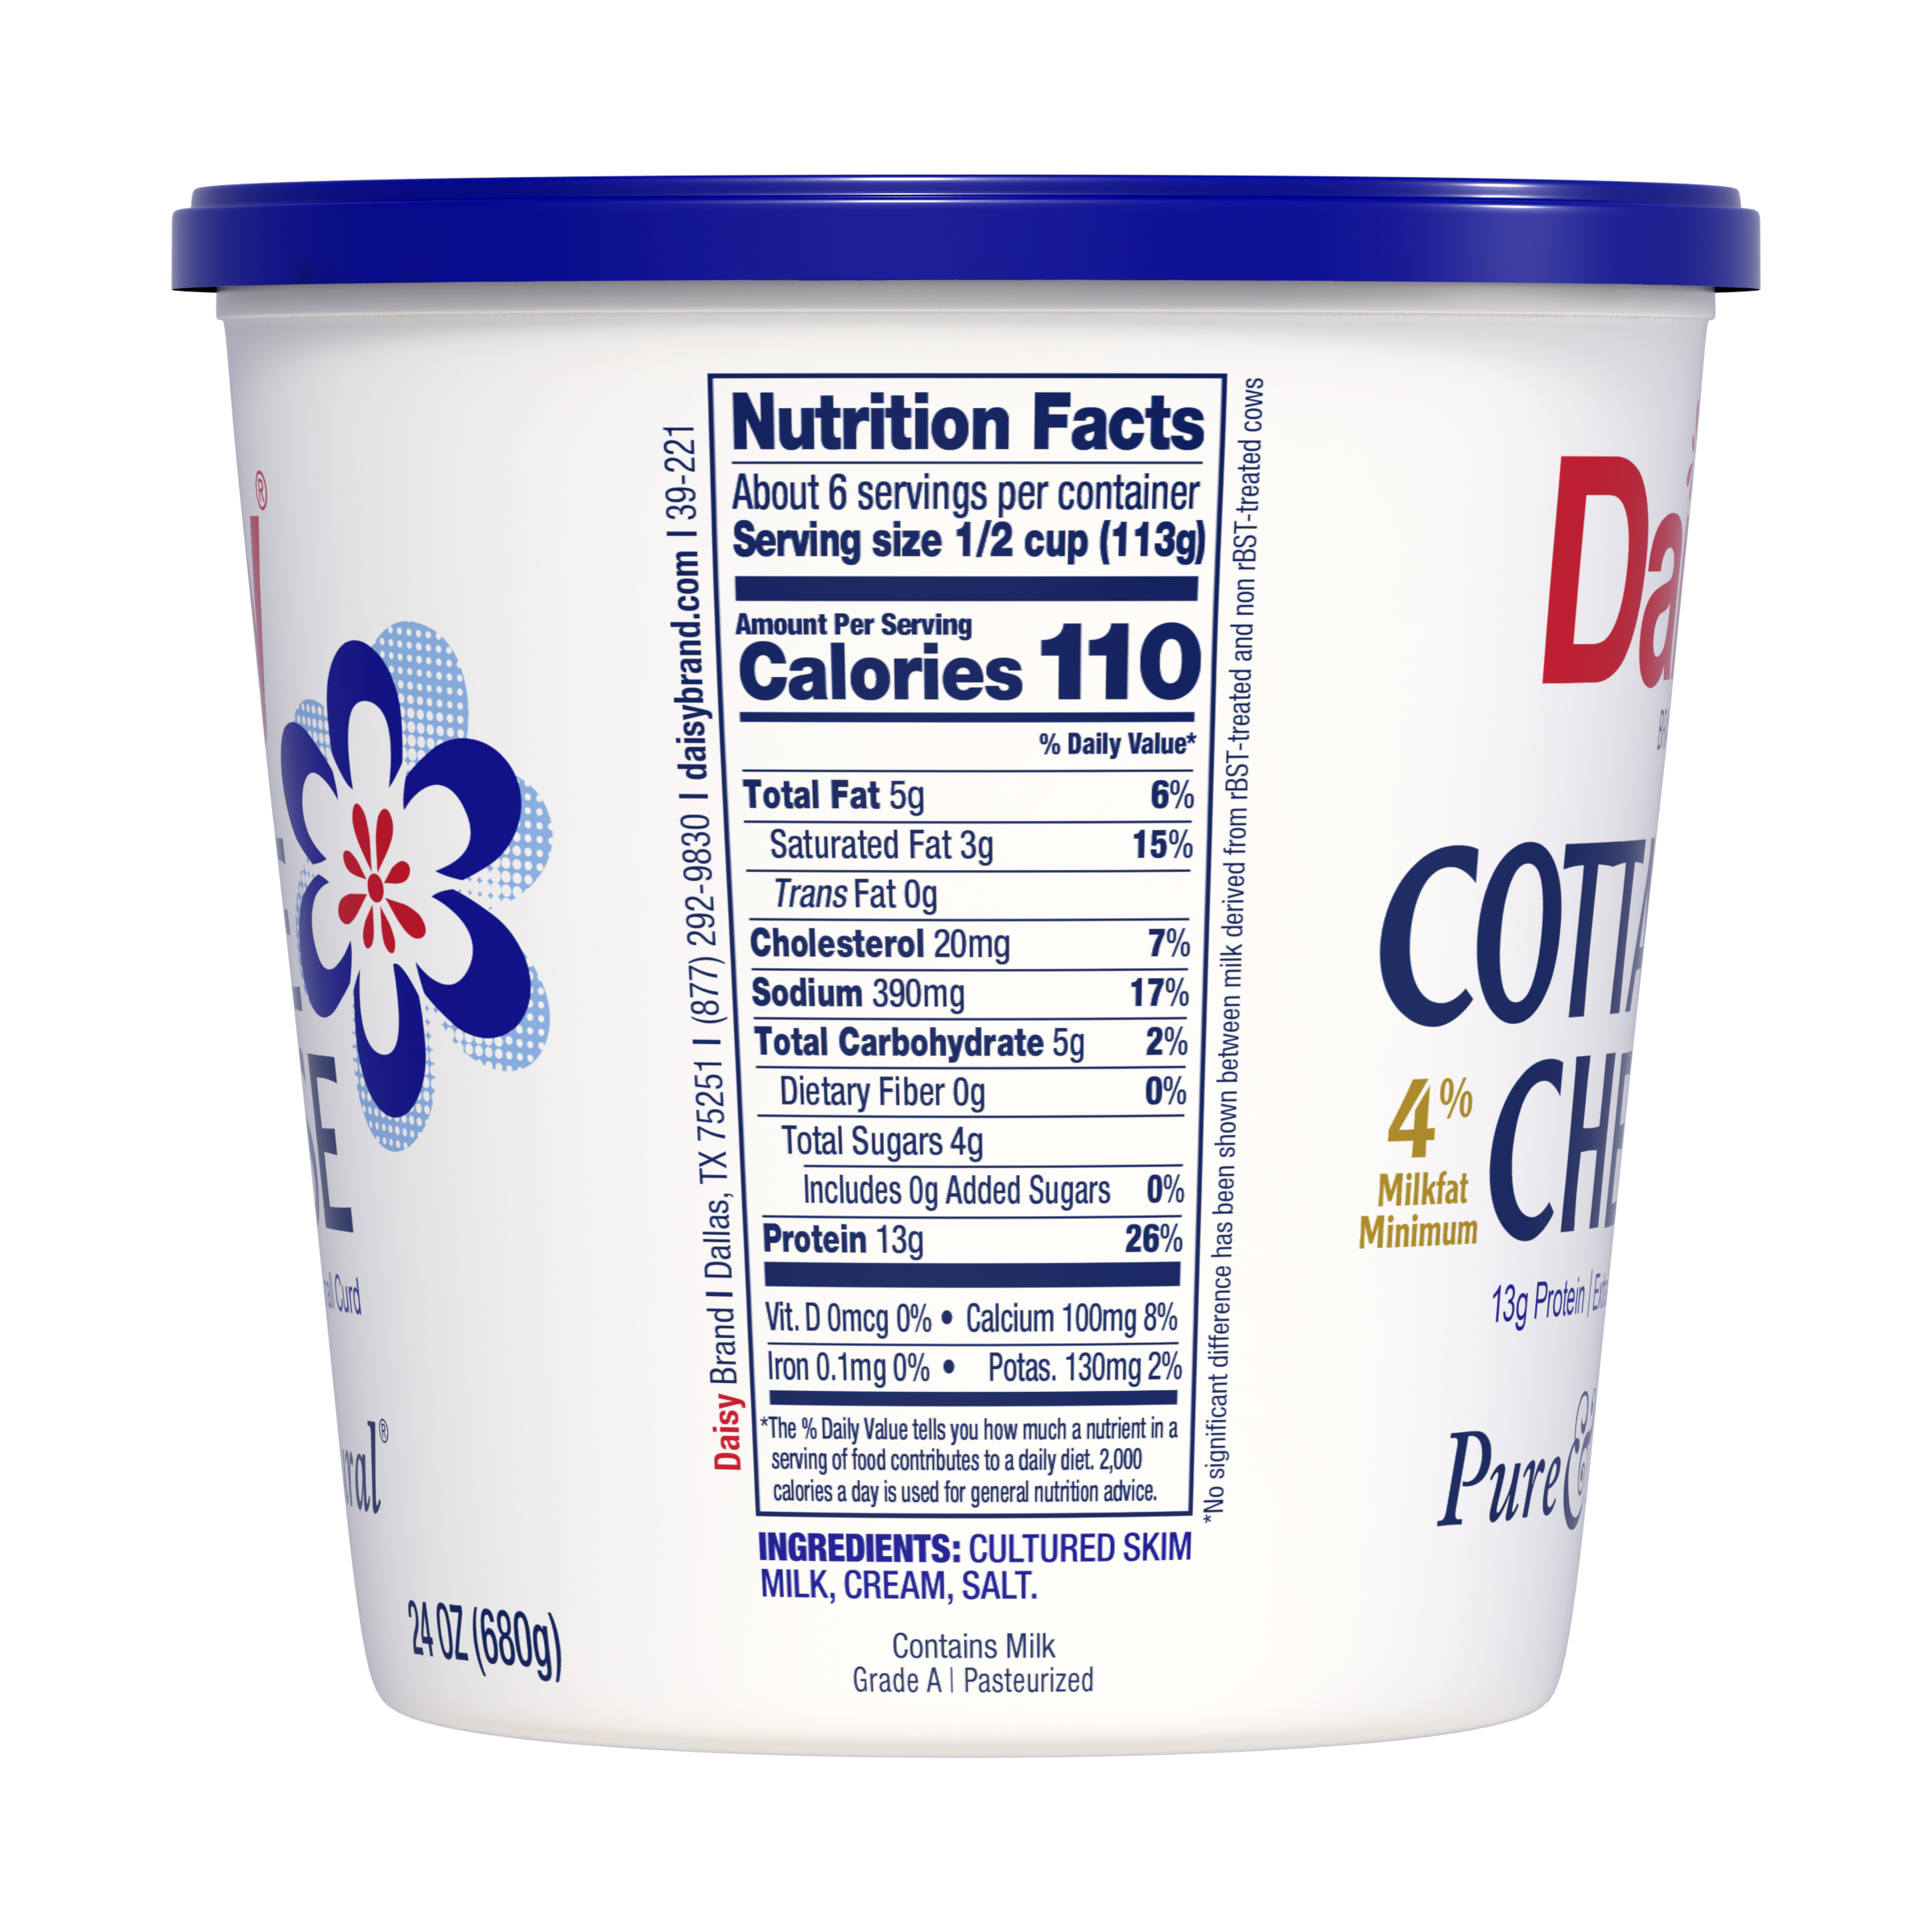 Daisy Pure and Natural Cottage Cheese, 4% Milkfat, 24 oz (1.5 lb) Tub (Refrigerated) - 13g of Protein per serving - image 3 of 10